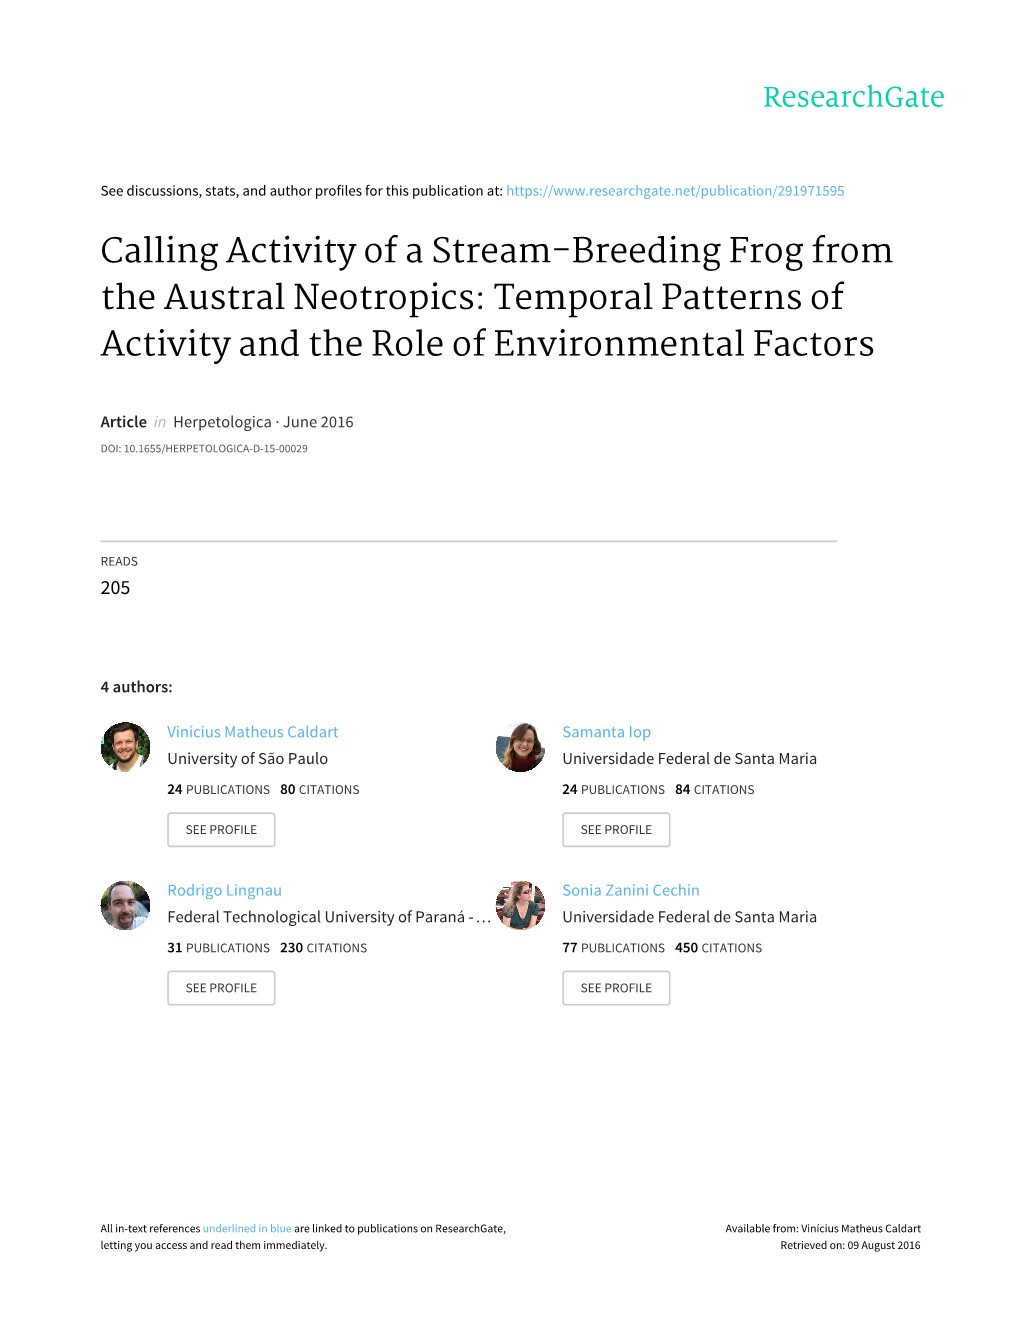 Calling Activity of a Stream-Breeding Frog from the Austral Neotropics: Temporal Patterns of Activity and the Role of Environmental Factors